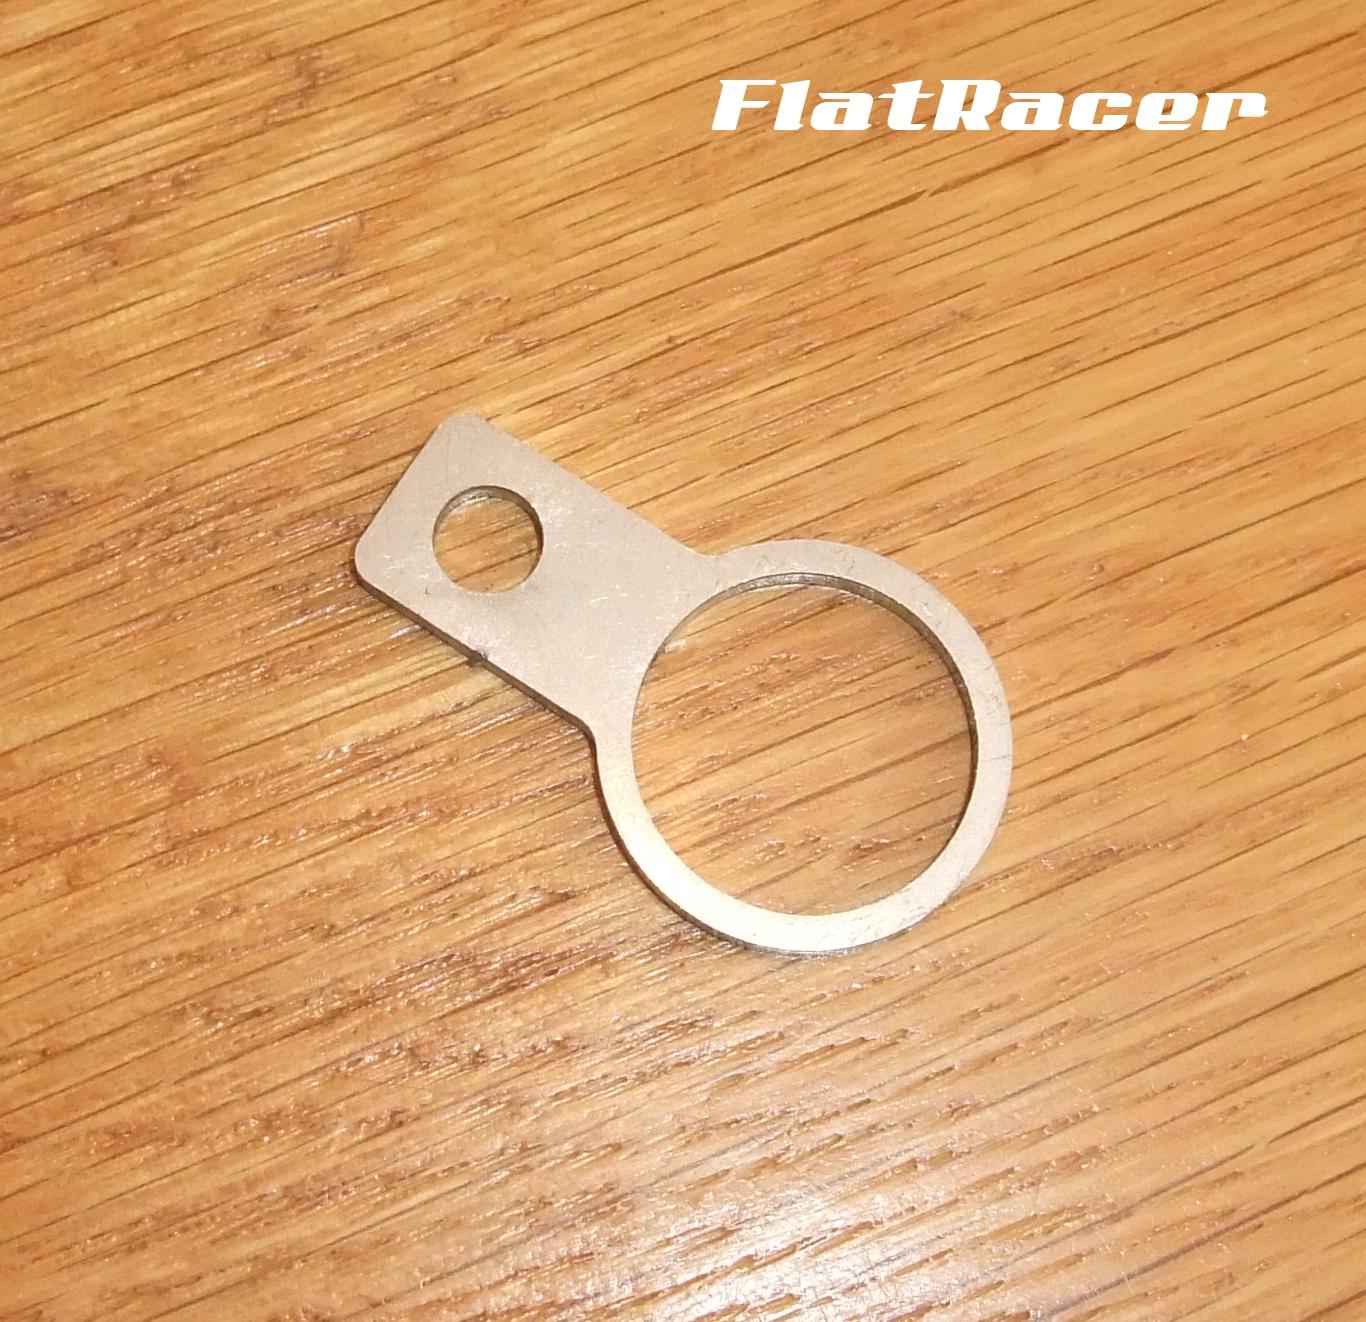 FlatRacer BMW R80 GS, R100 GS (90-95) s/s brake hose clamp guide lower front - 34322312311